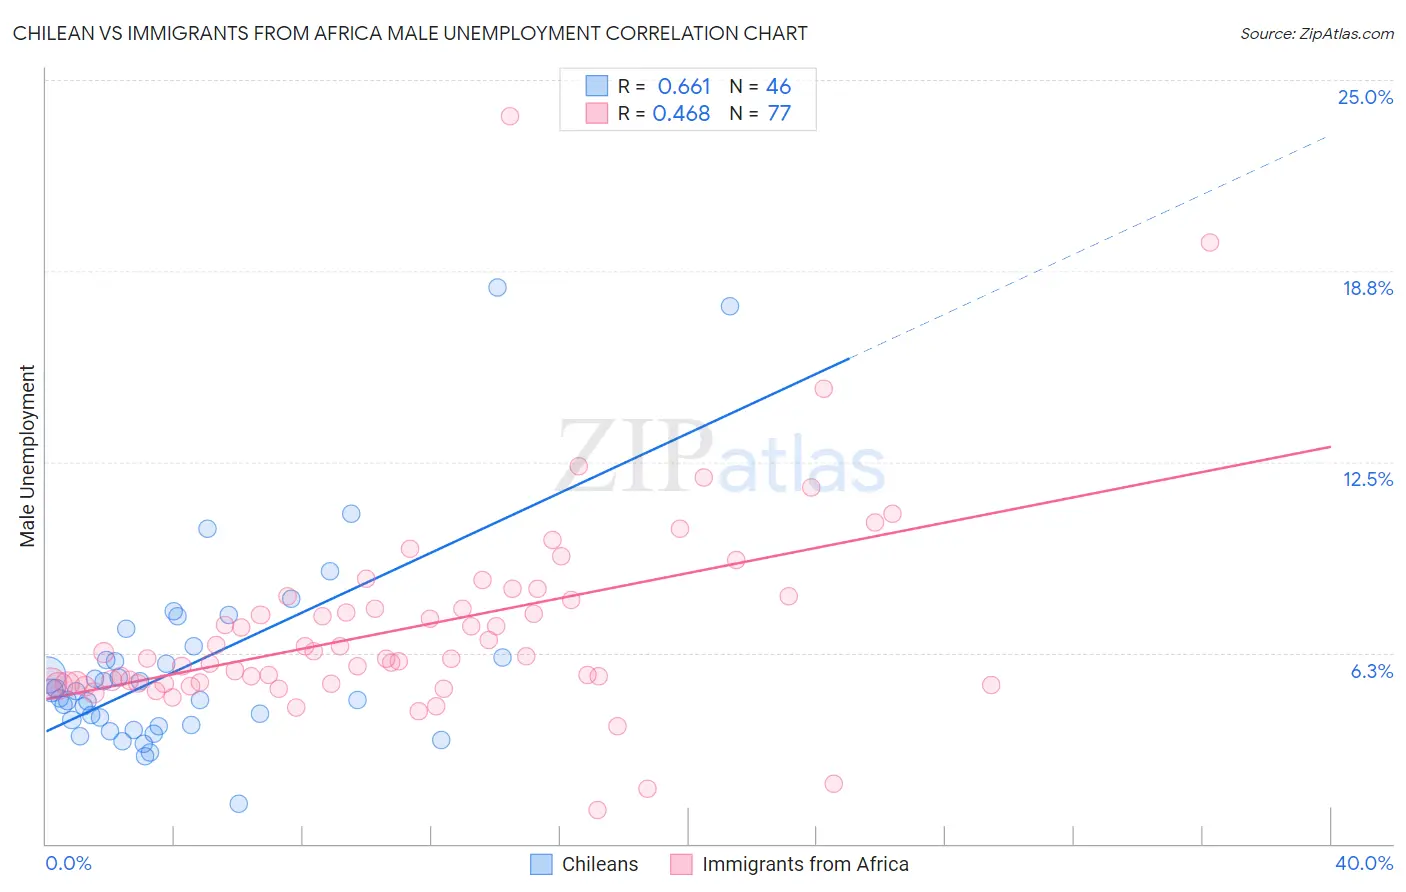 Chilean vs Immigrants from Africa Male Unemployment